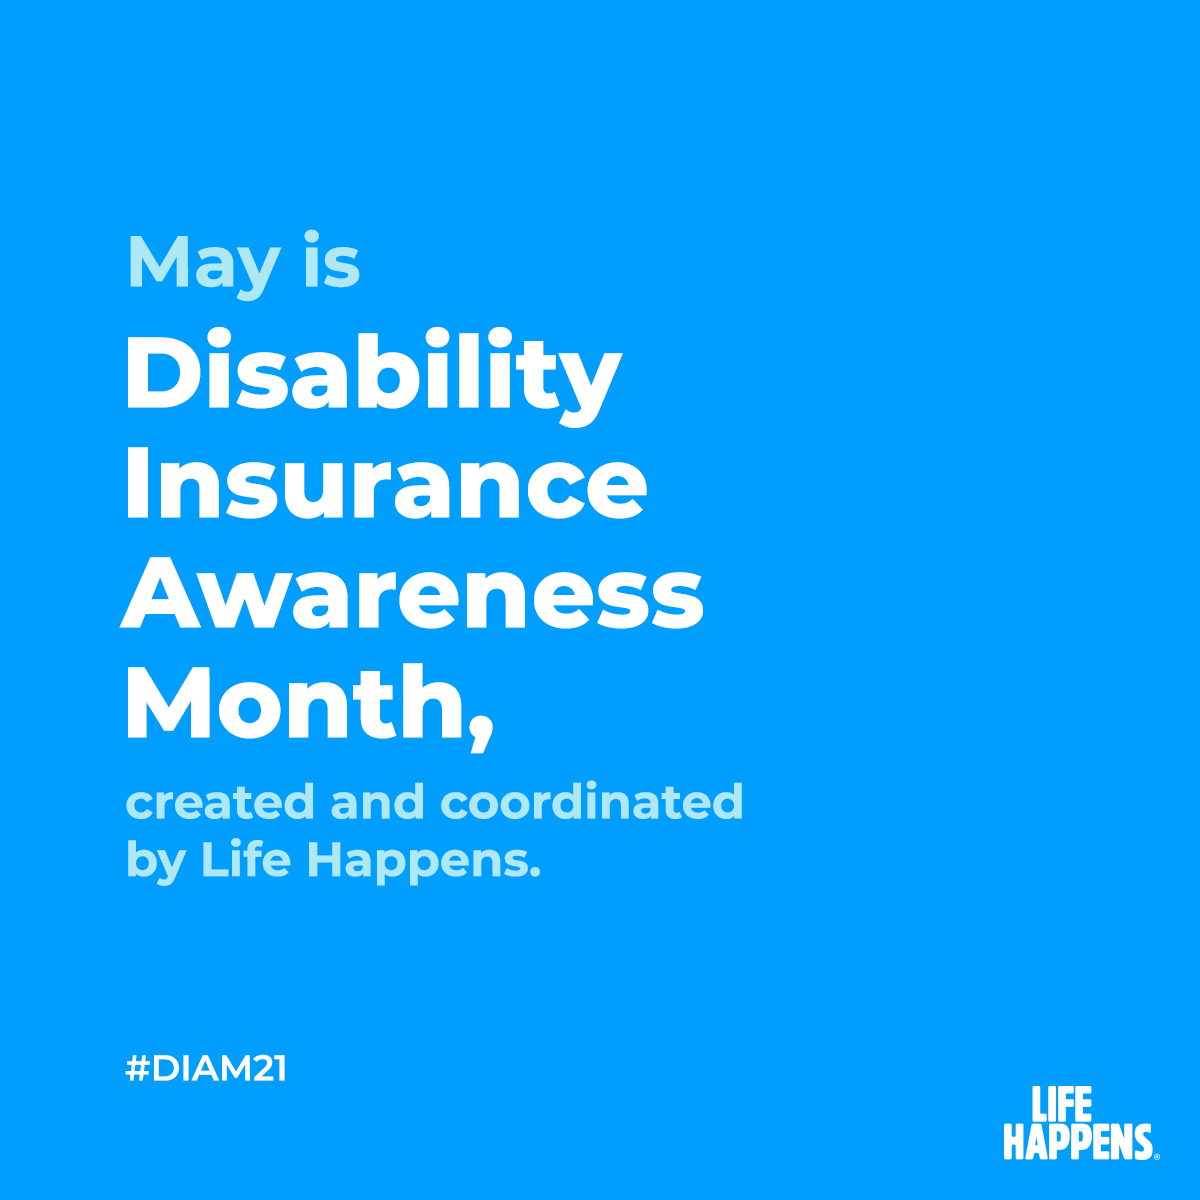 May is Disability Insurance Awareness Month